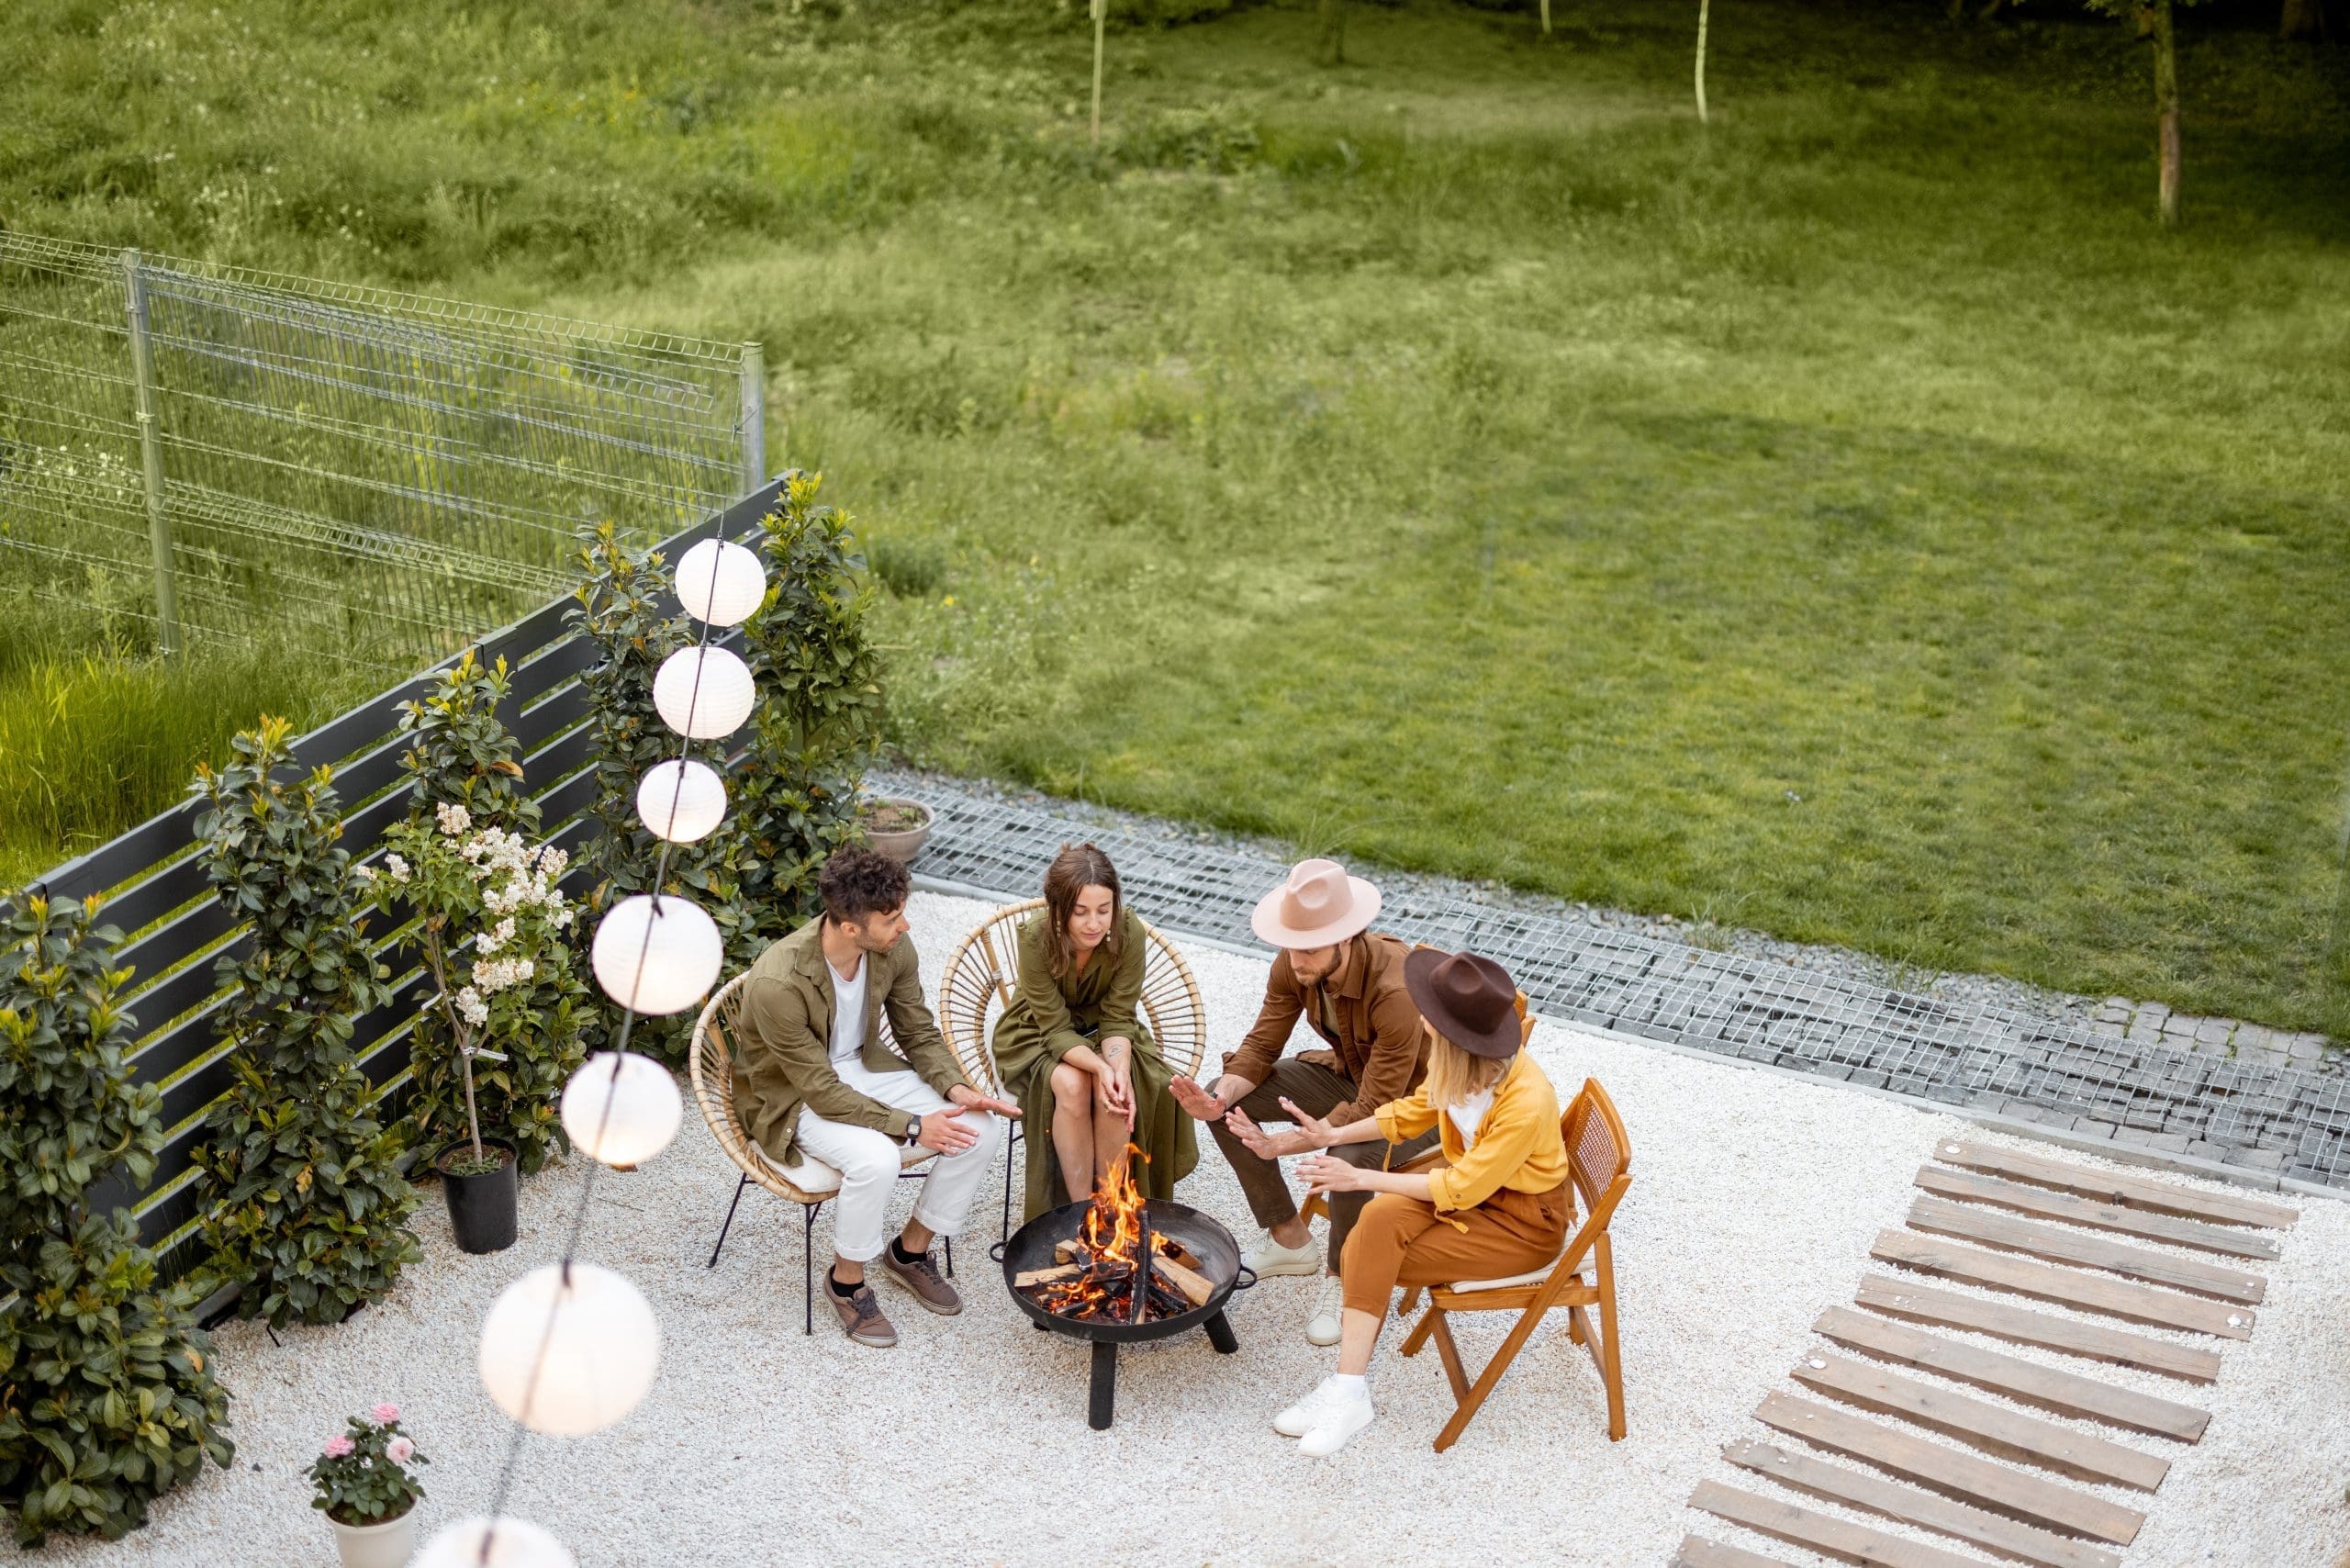 A group of young friends having great summertime, sitting by a fireplace at the backyard of the country house in nature. Top view